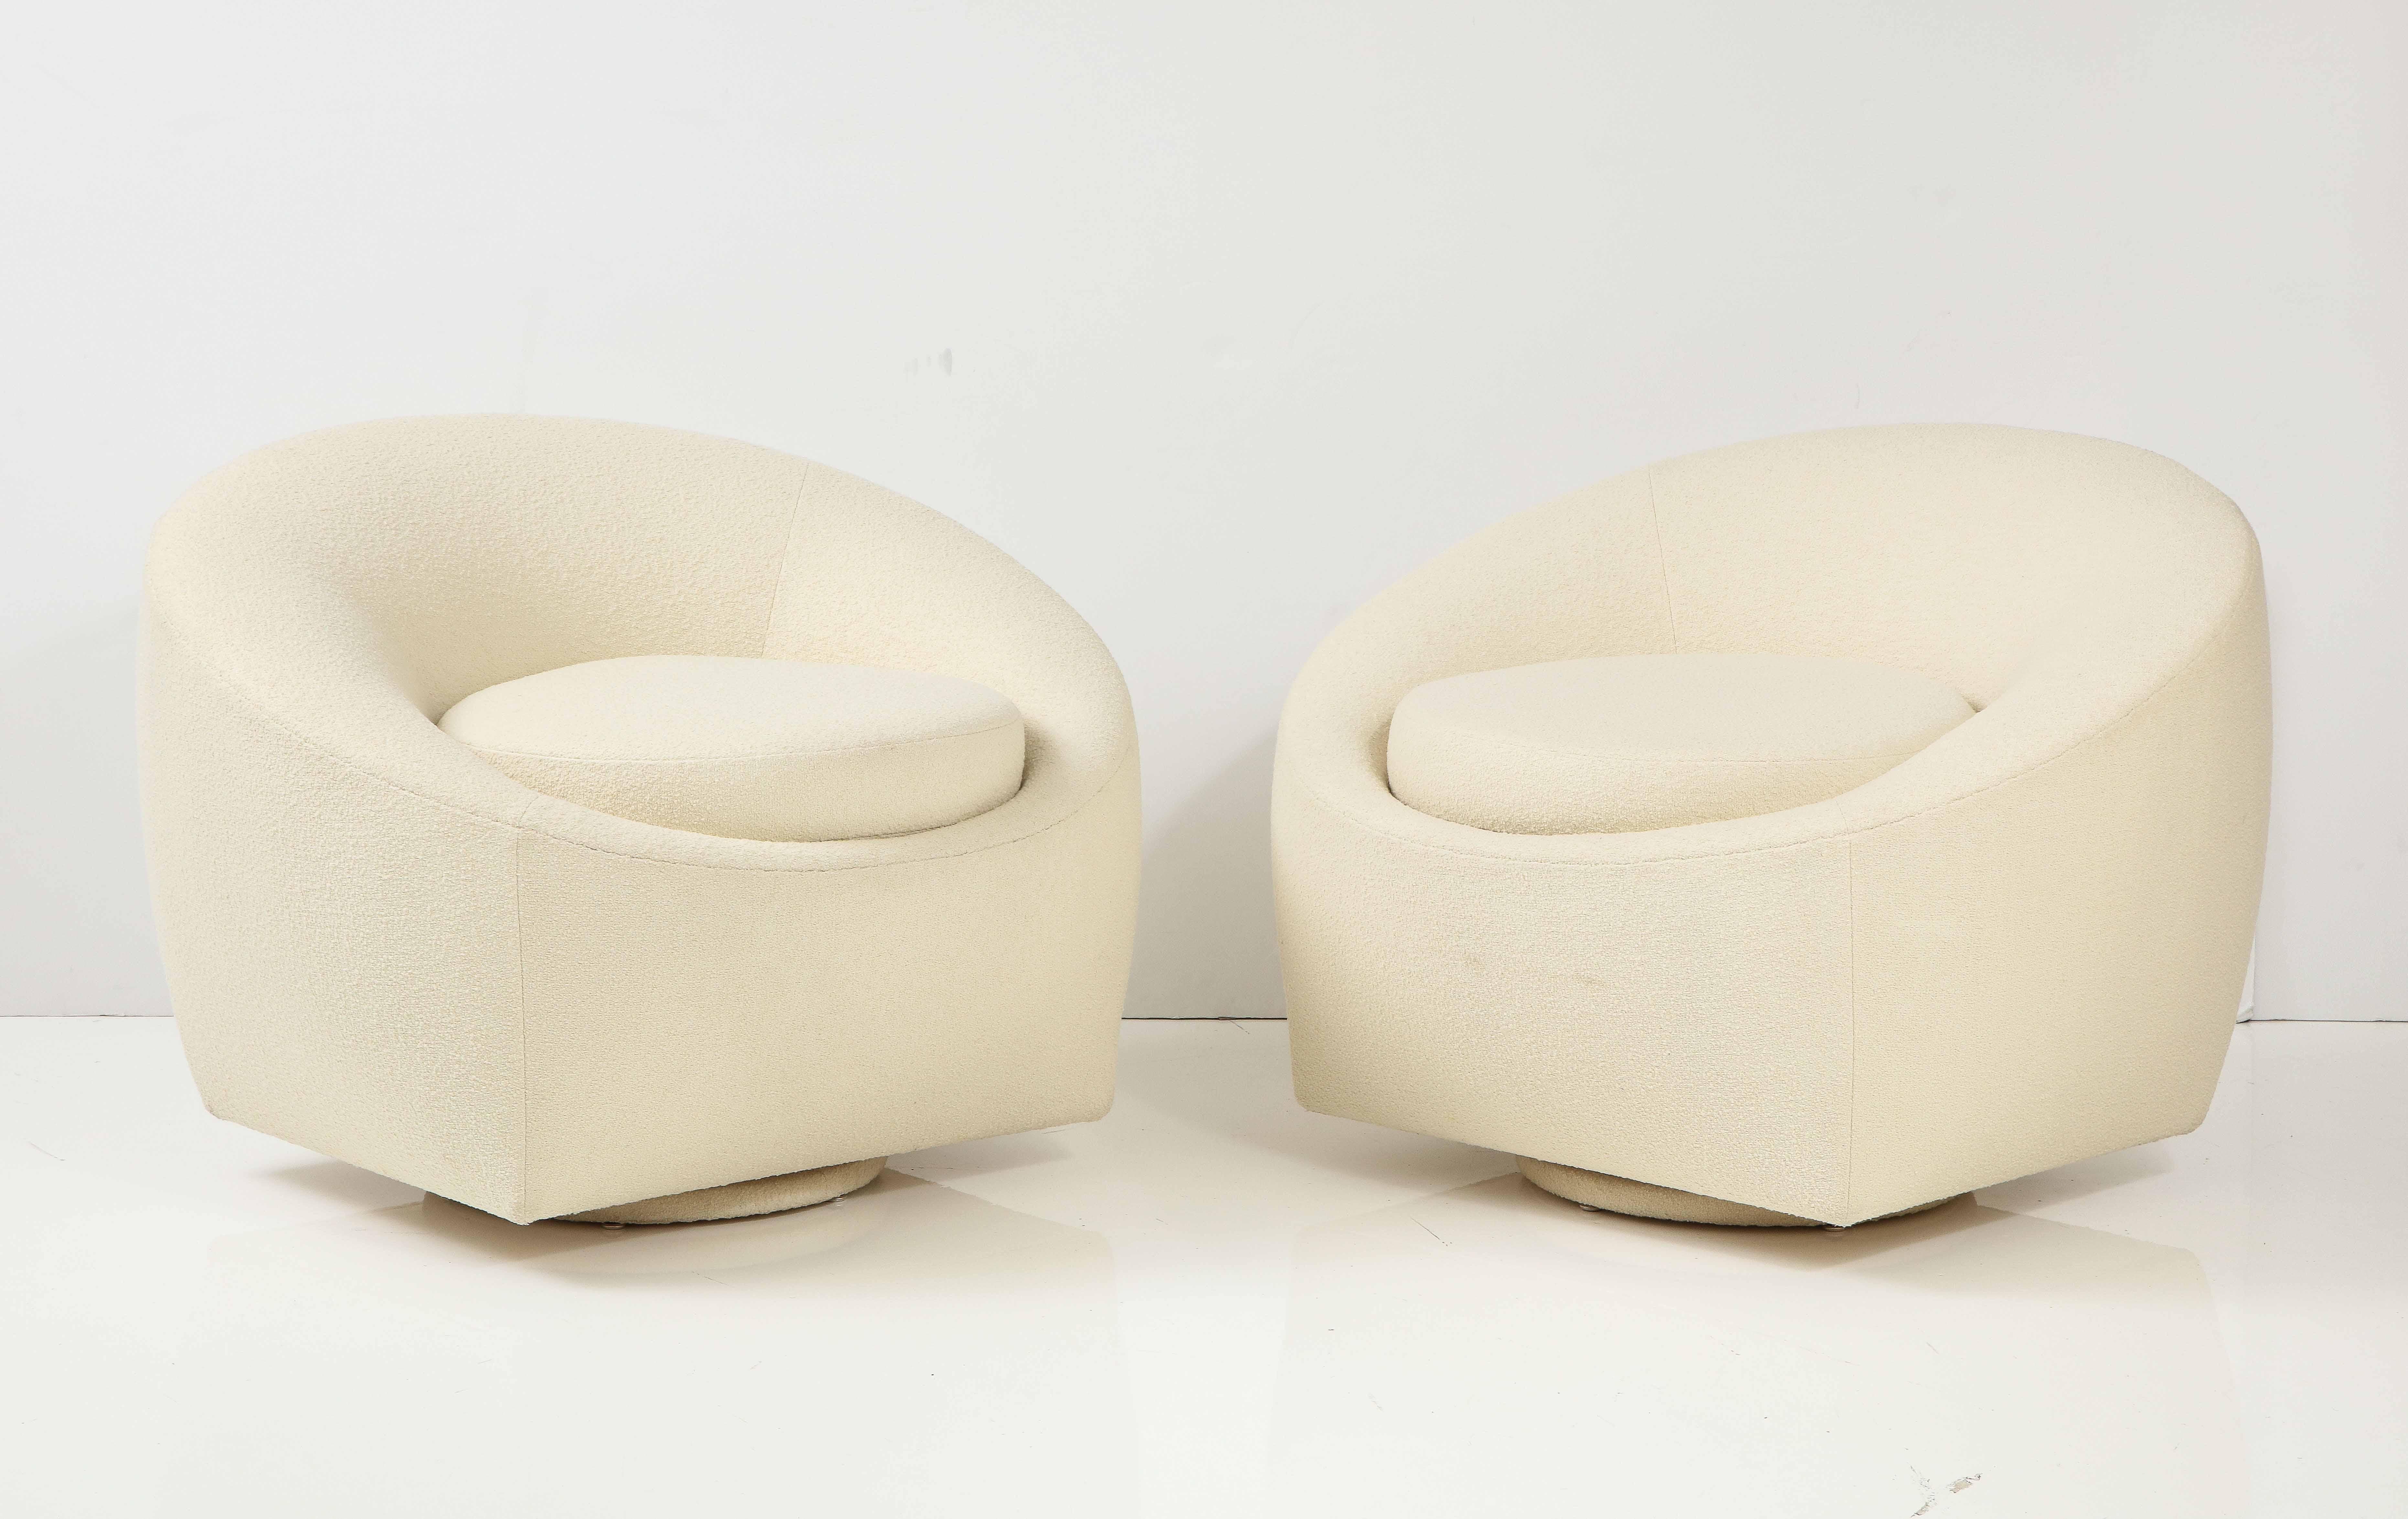 Pair of 1970s Modernist Swivel club chairs.
The chairs have been beautifully reupholstered in Knoll Ivory bouclé fabric and sit on swivel bases.